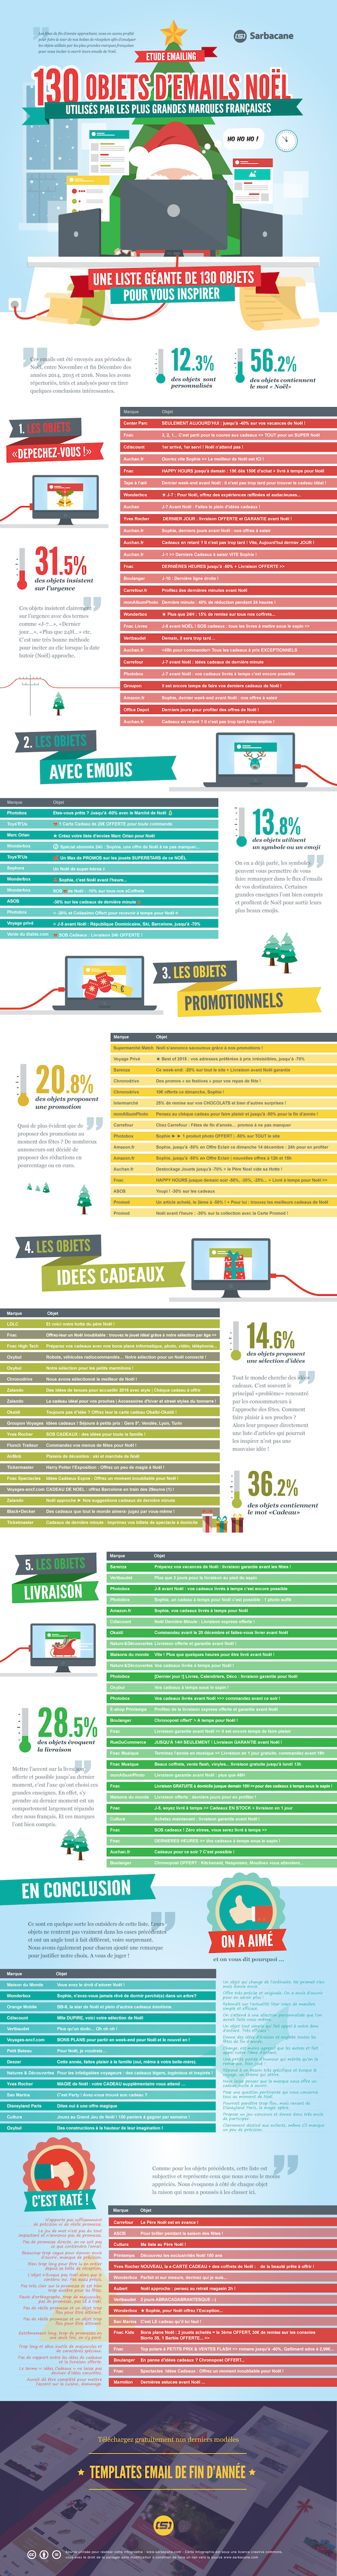 Infographie-email-noel